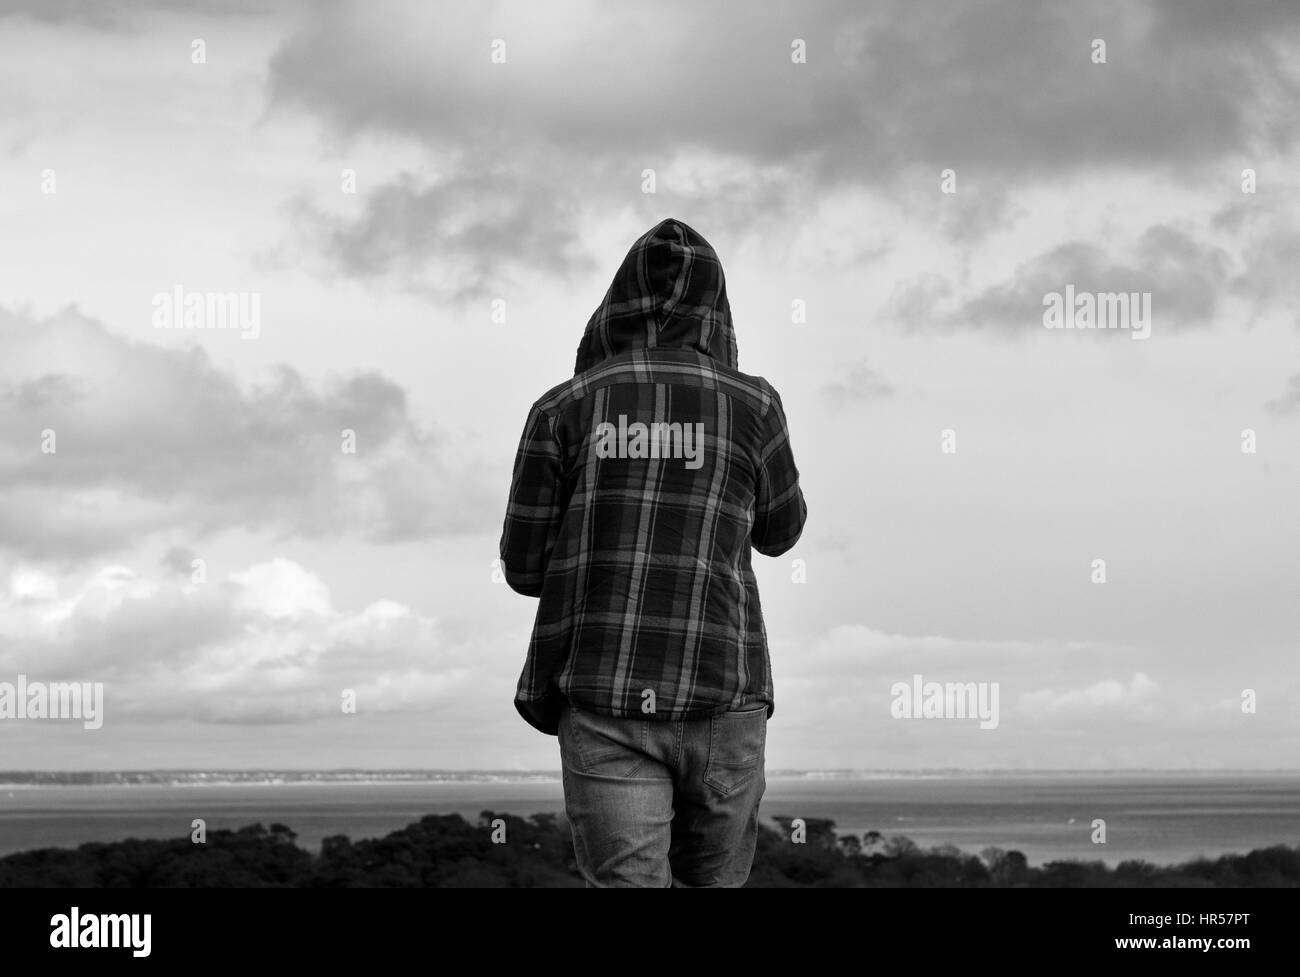 Black and white image of a hooded young man from behind looking over a landscape. Stock Photo